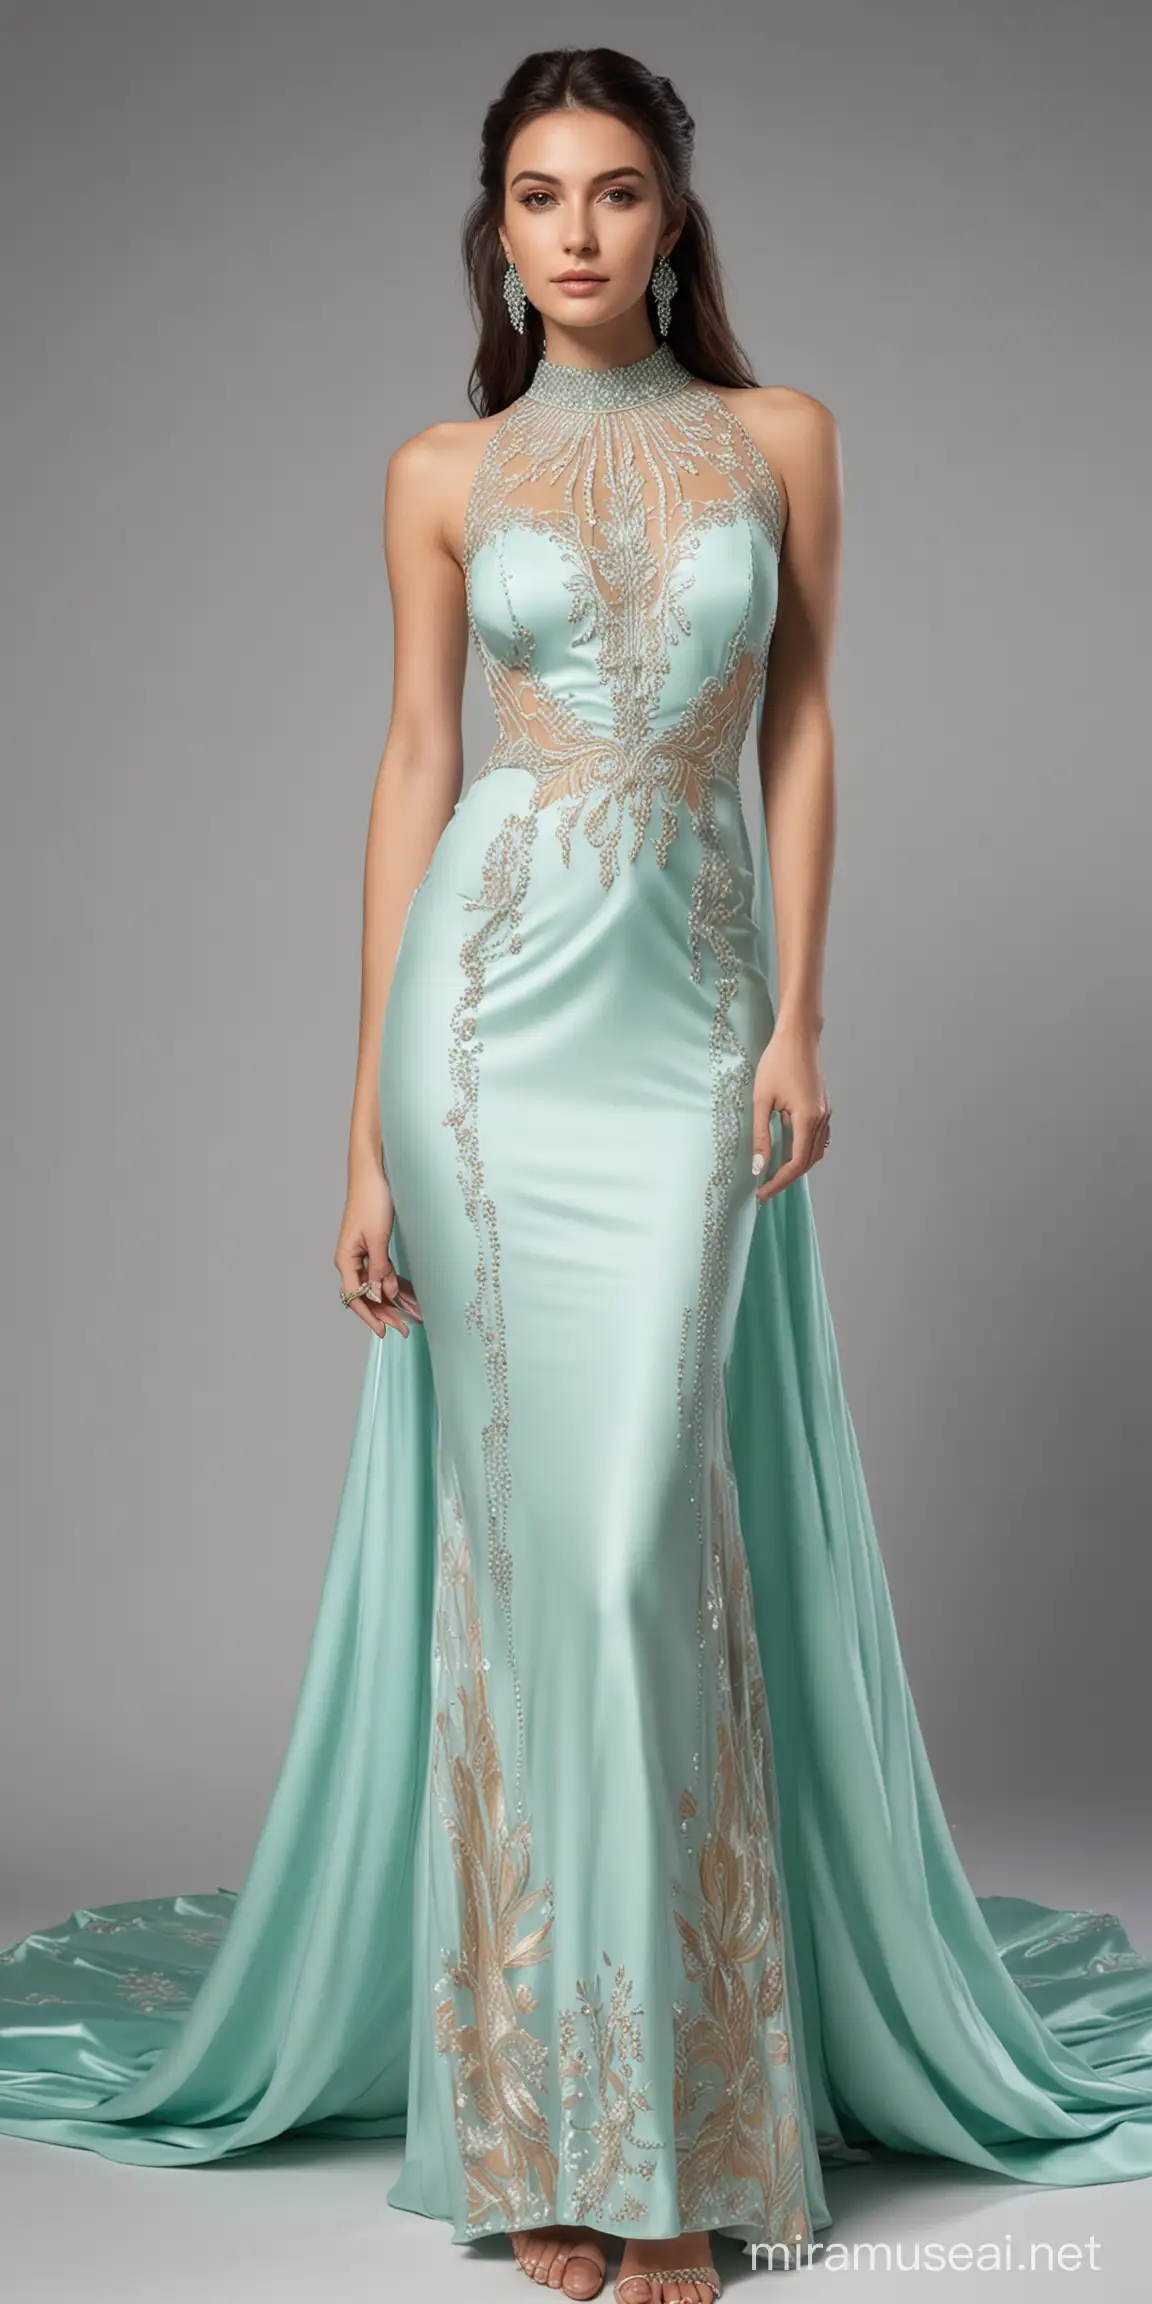 Design a luxury fashionable stylish high dress for men and women as casiphia with Tiffany colour and brand as theme.